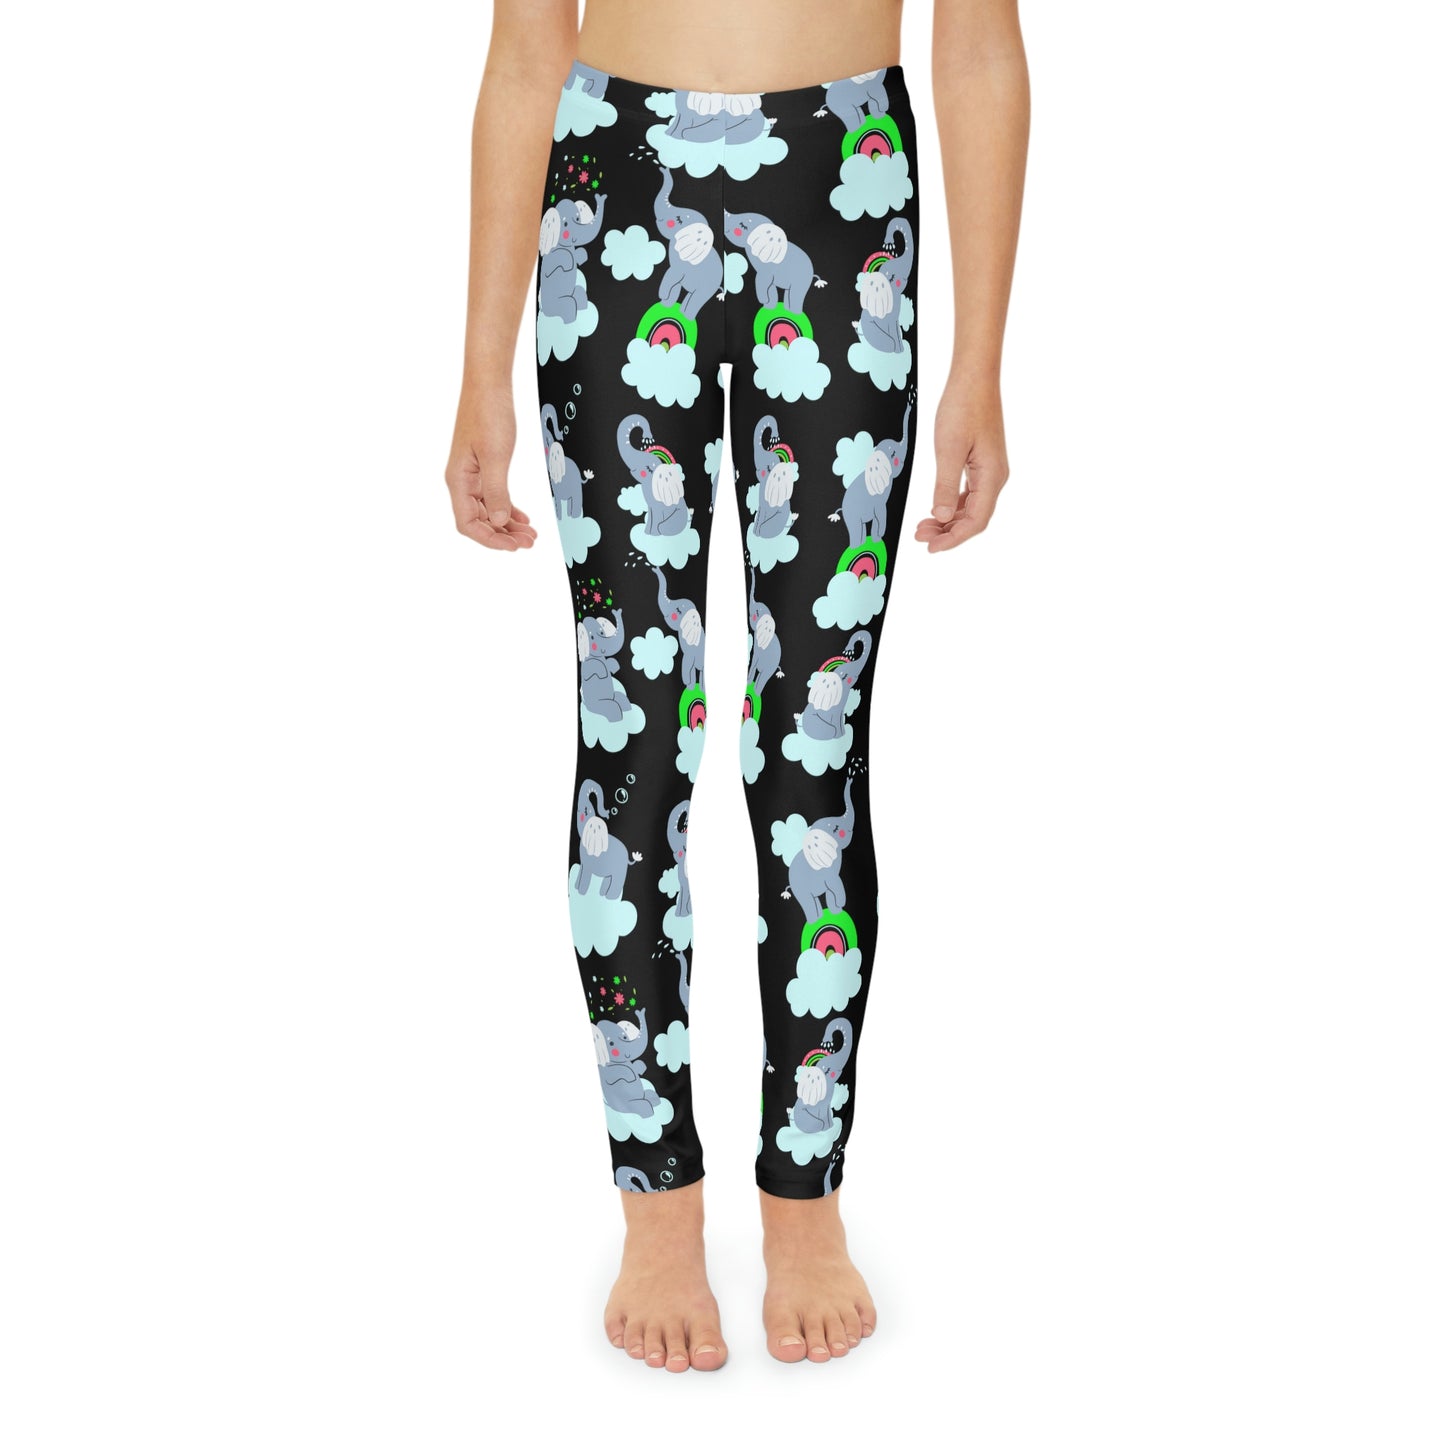 Elephant animal kingdom, Safari Youth Leggings, One of a Kind Gift - Unique Workout Activewear tights for kids, Daughter, Niece Christmas Gift